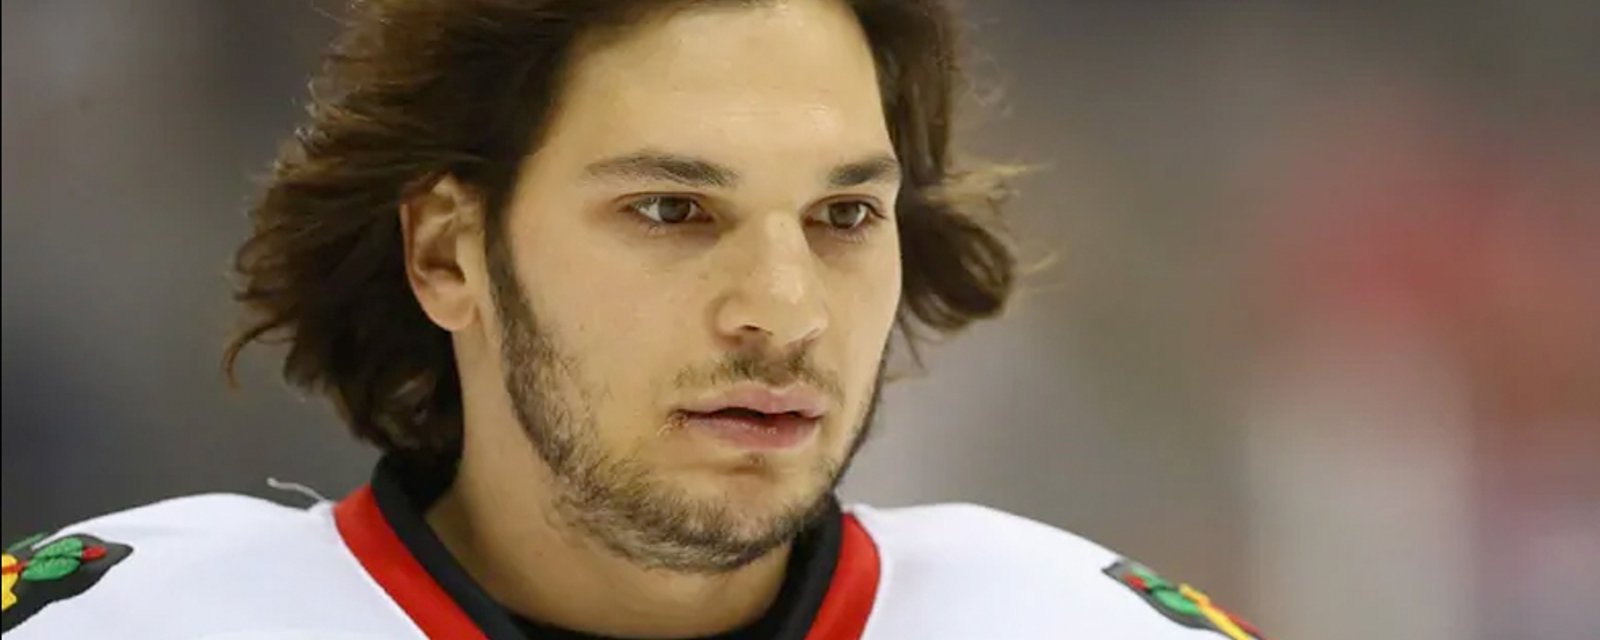 Dan Carcillo rocks the hockey world with horrific allegations of bullying, hazing and child abuse.